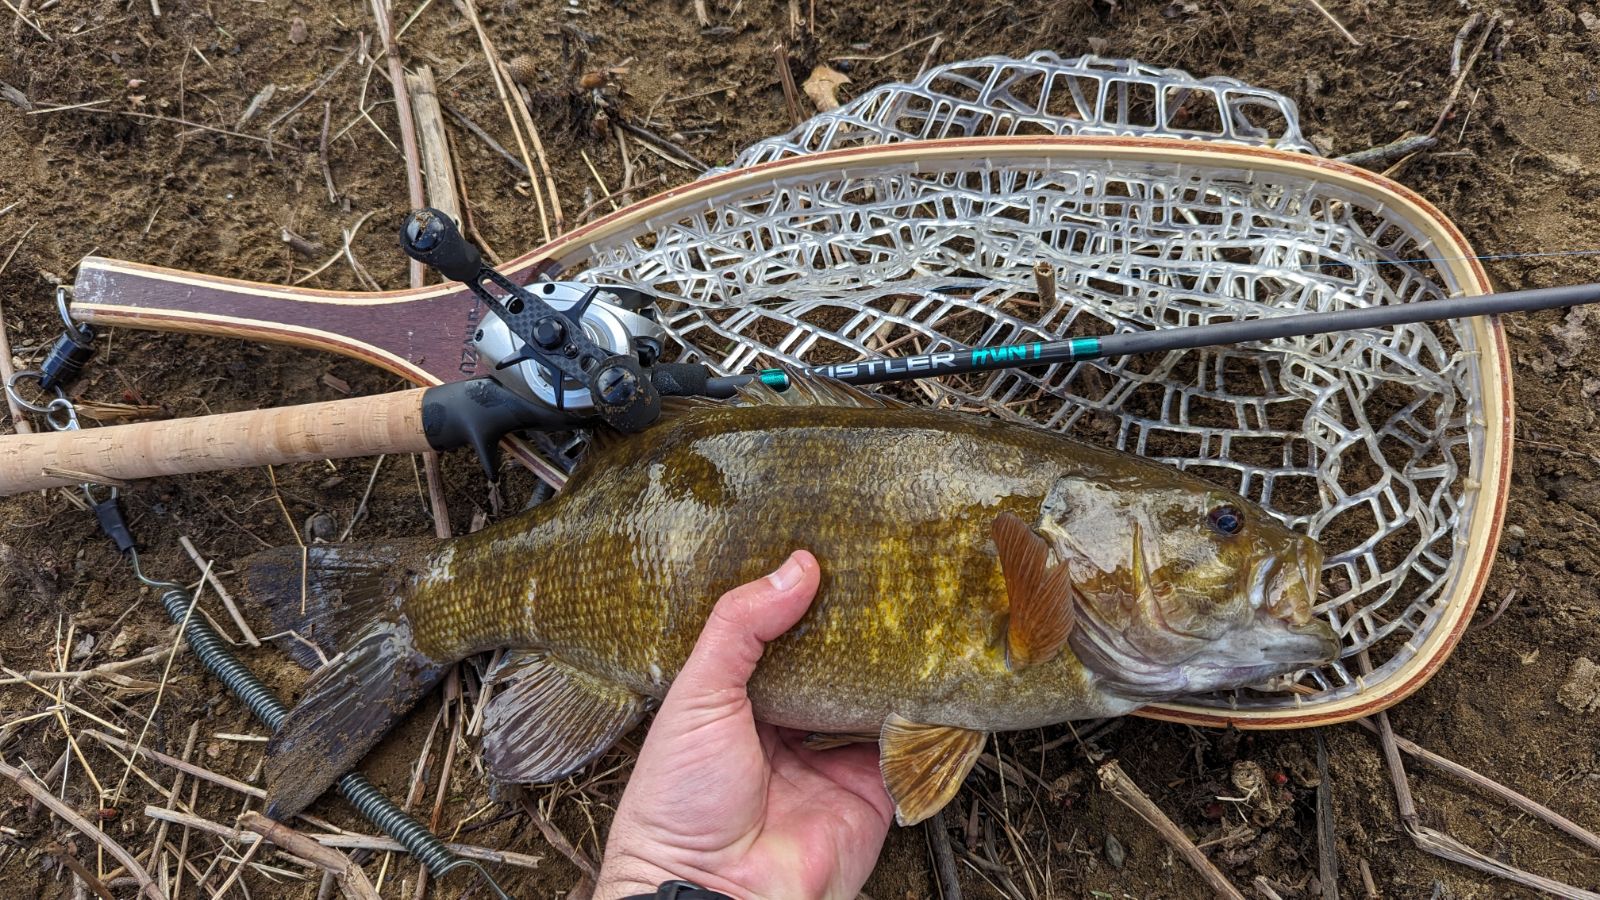 Smallmouth Bass Fishing - Rods and Reels